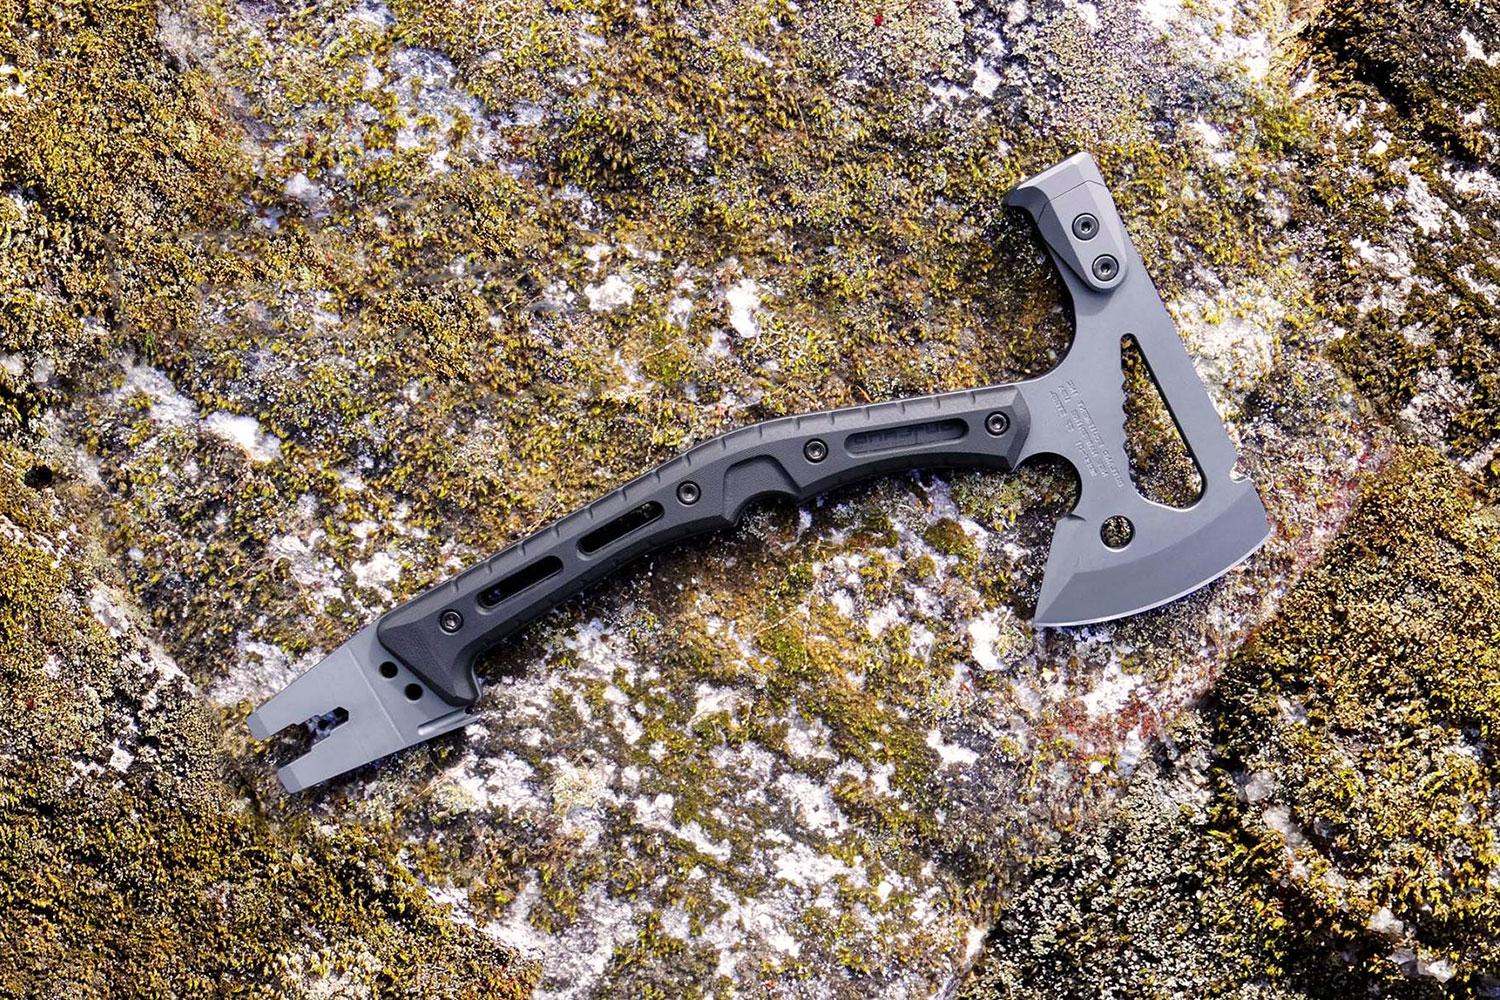 Trekking: The Multi-Mission Axe is the only axe you'll need